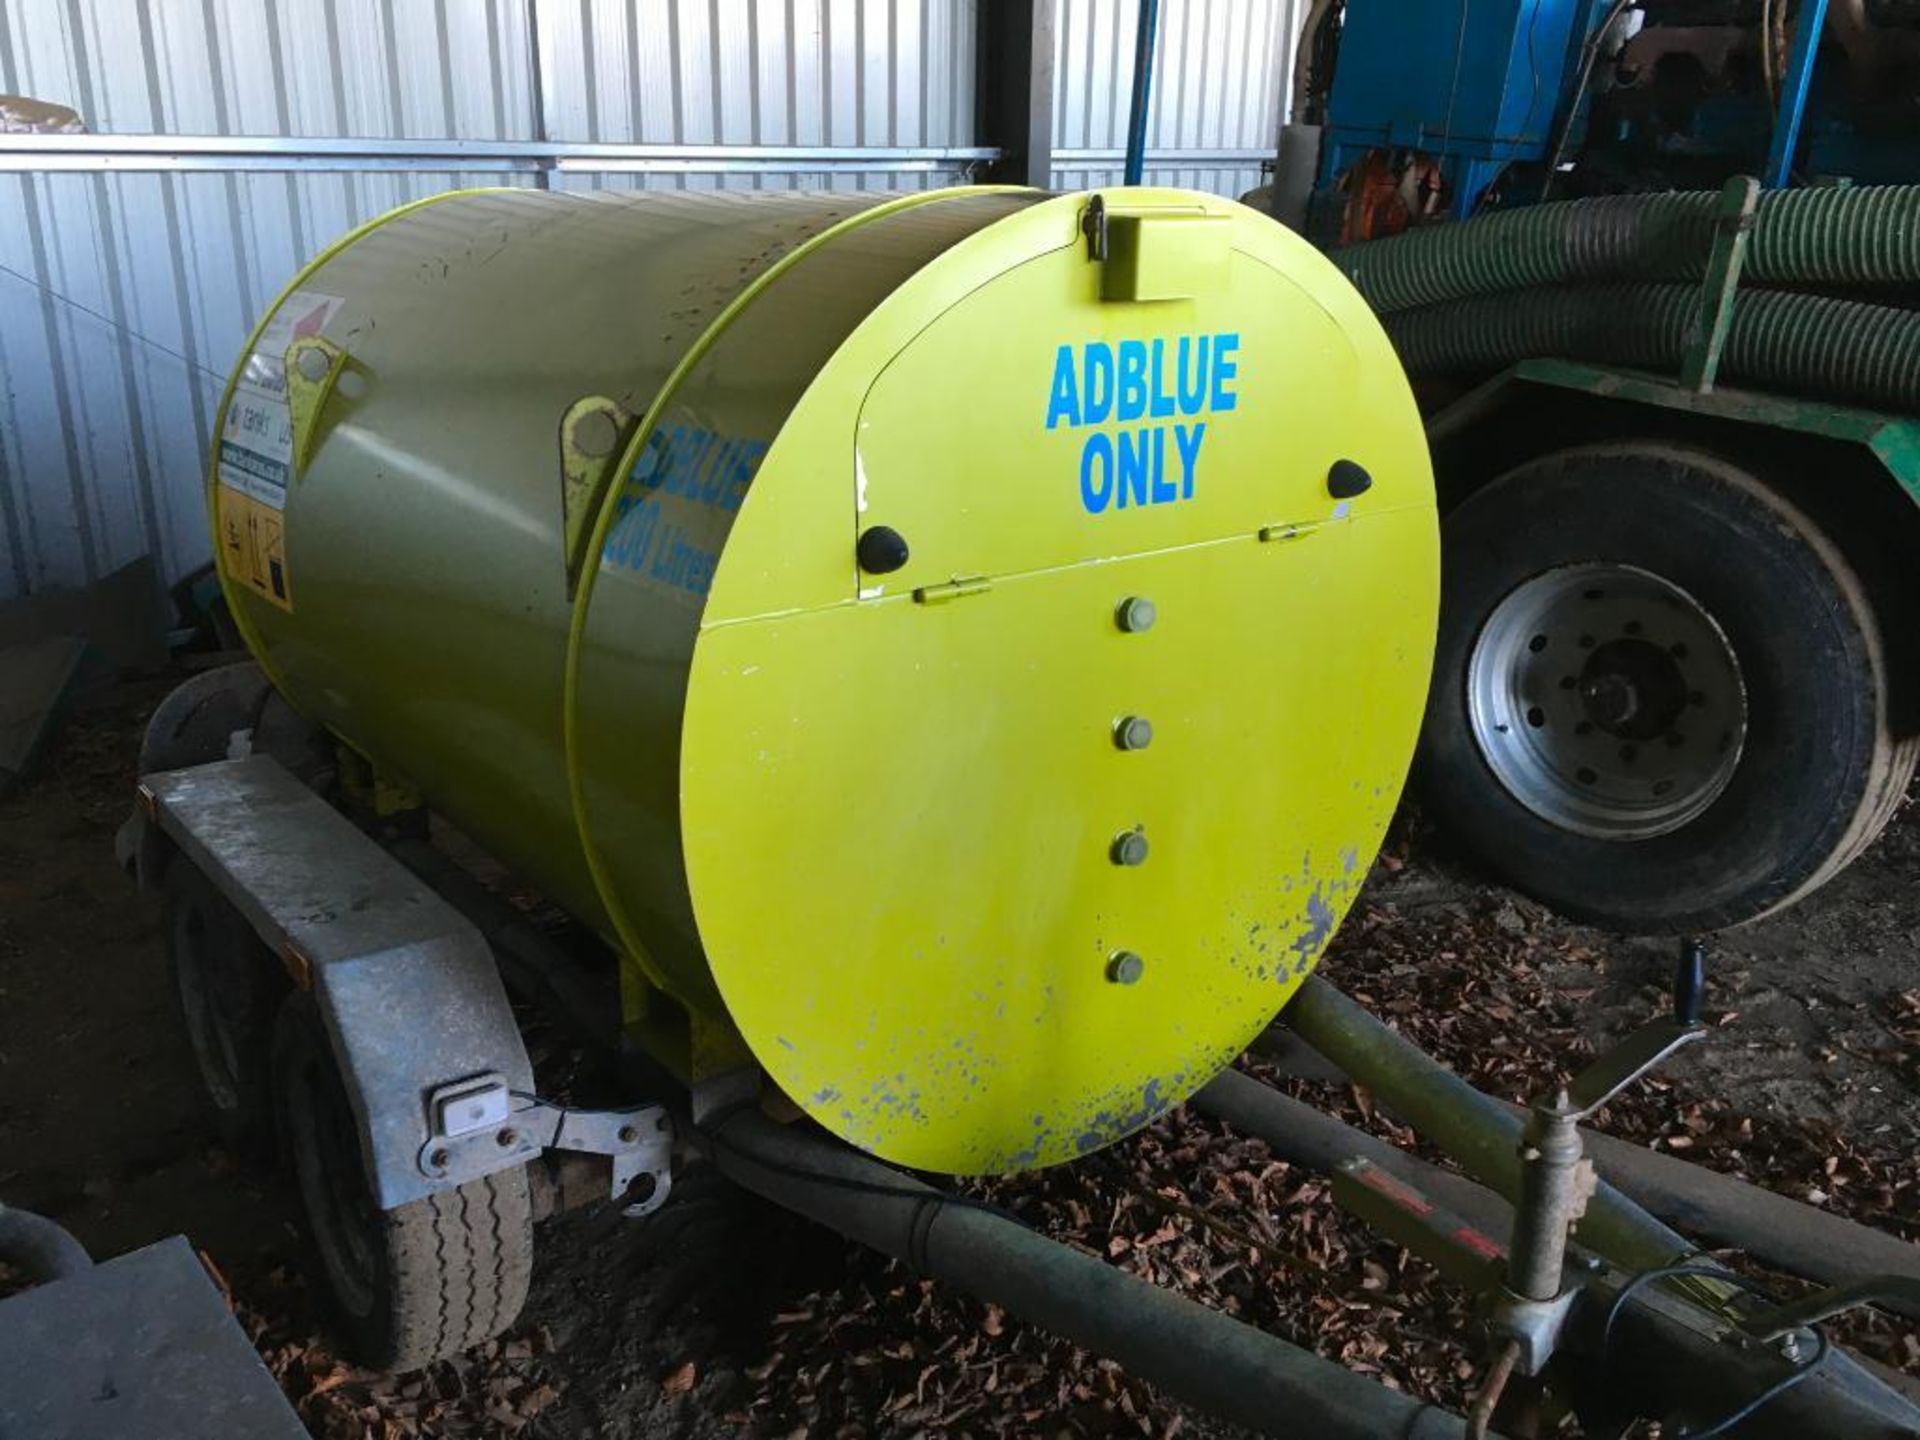 2013 FuelProof trailed bowser, 200L AdBlue and 1,000L gas oil capacity. Serial No: 14842/4 - Image 9 of 9